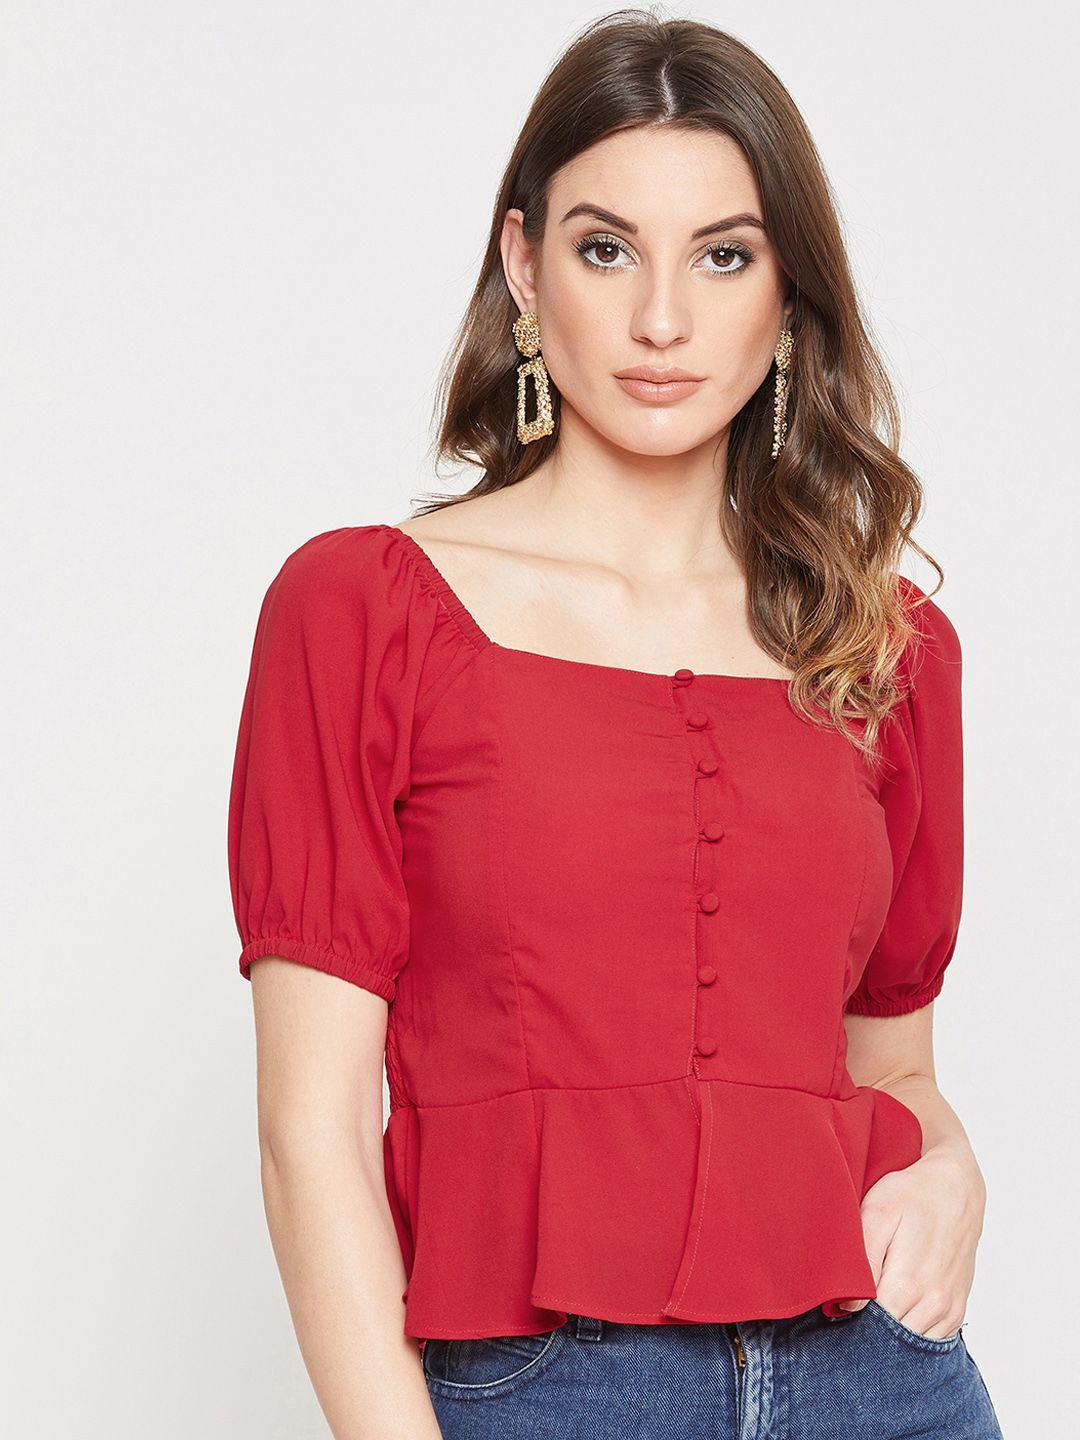 marie claire women red solid top